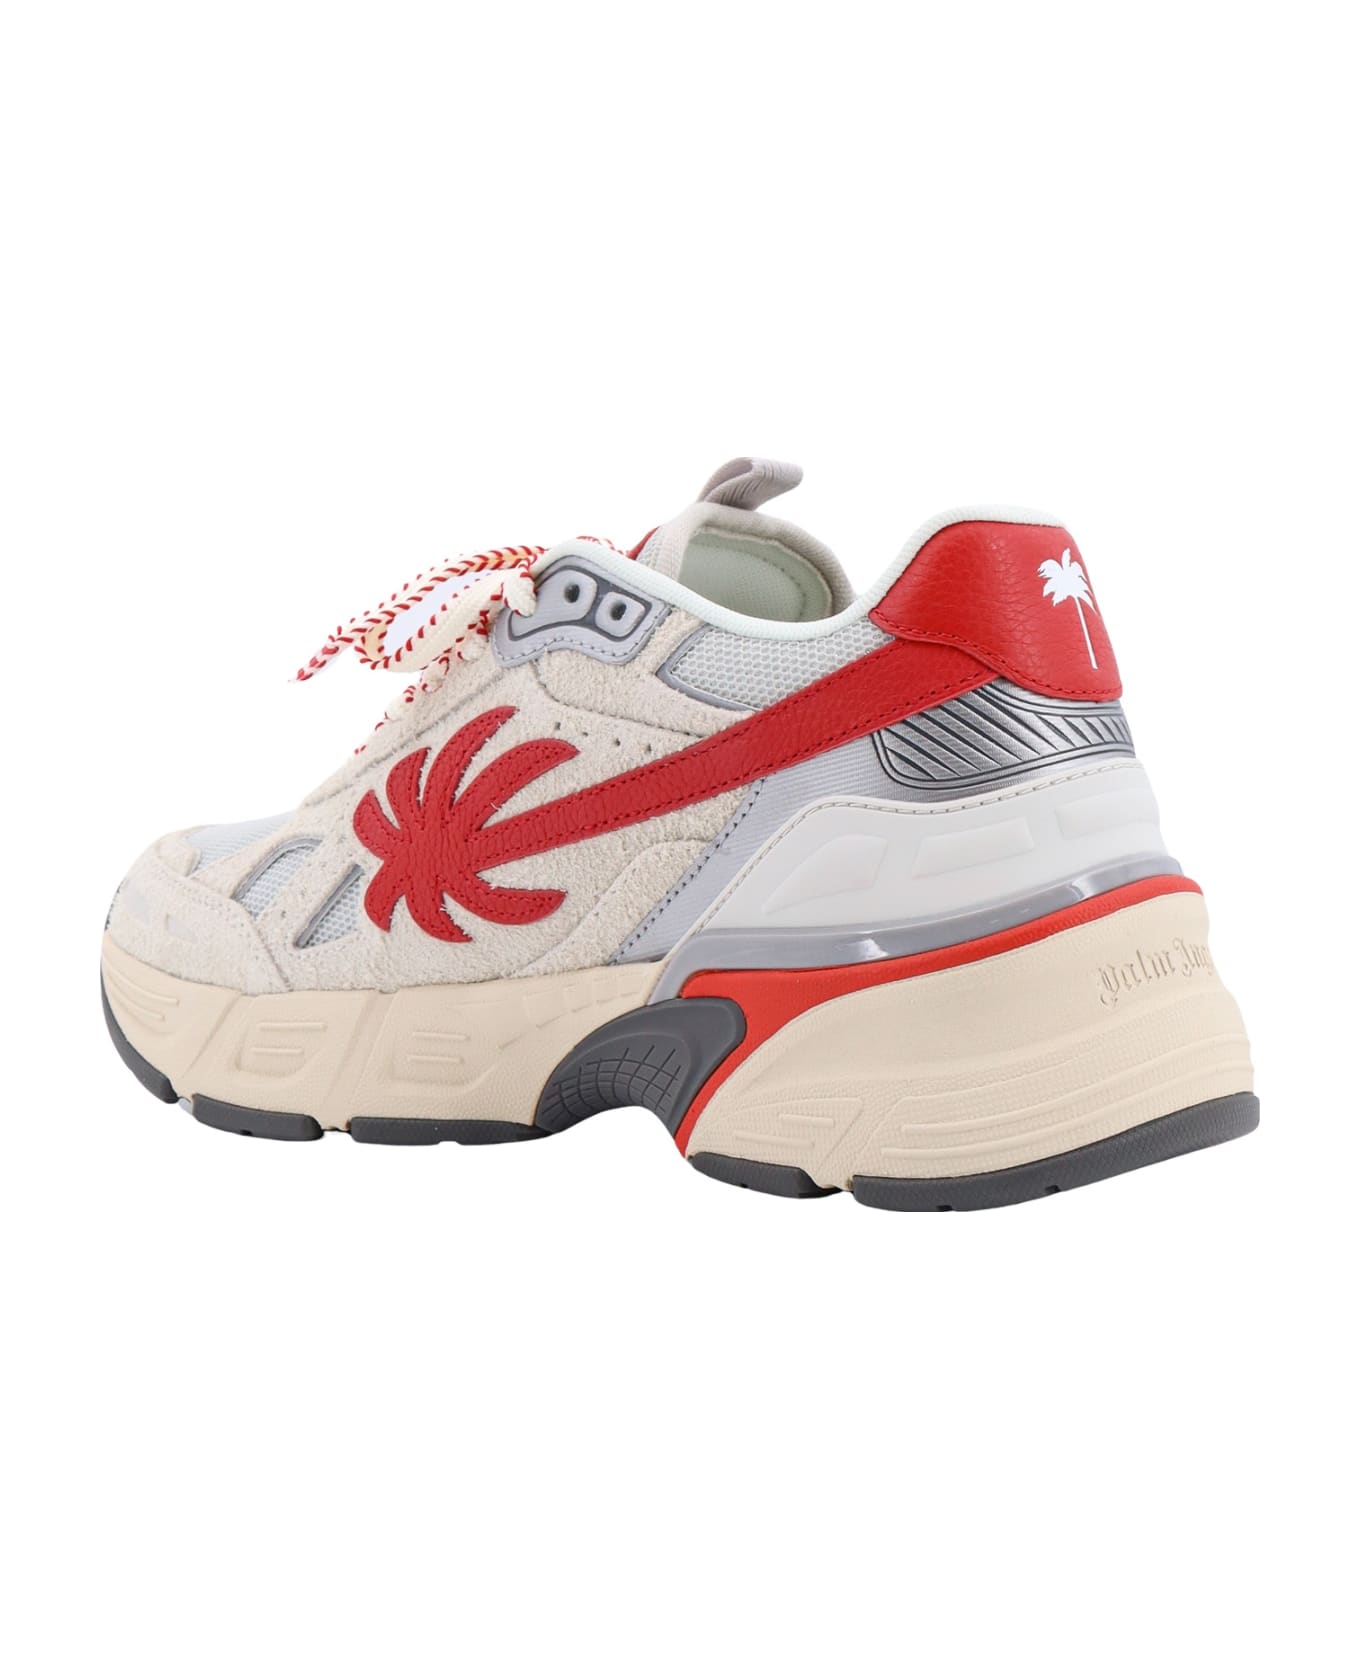 Palm Angels Multicolor Leather And Fabric Pa 4 Sneakers - Beige